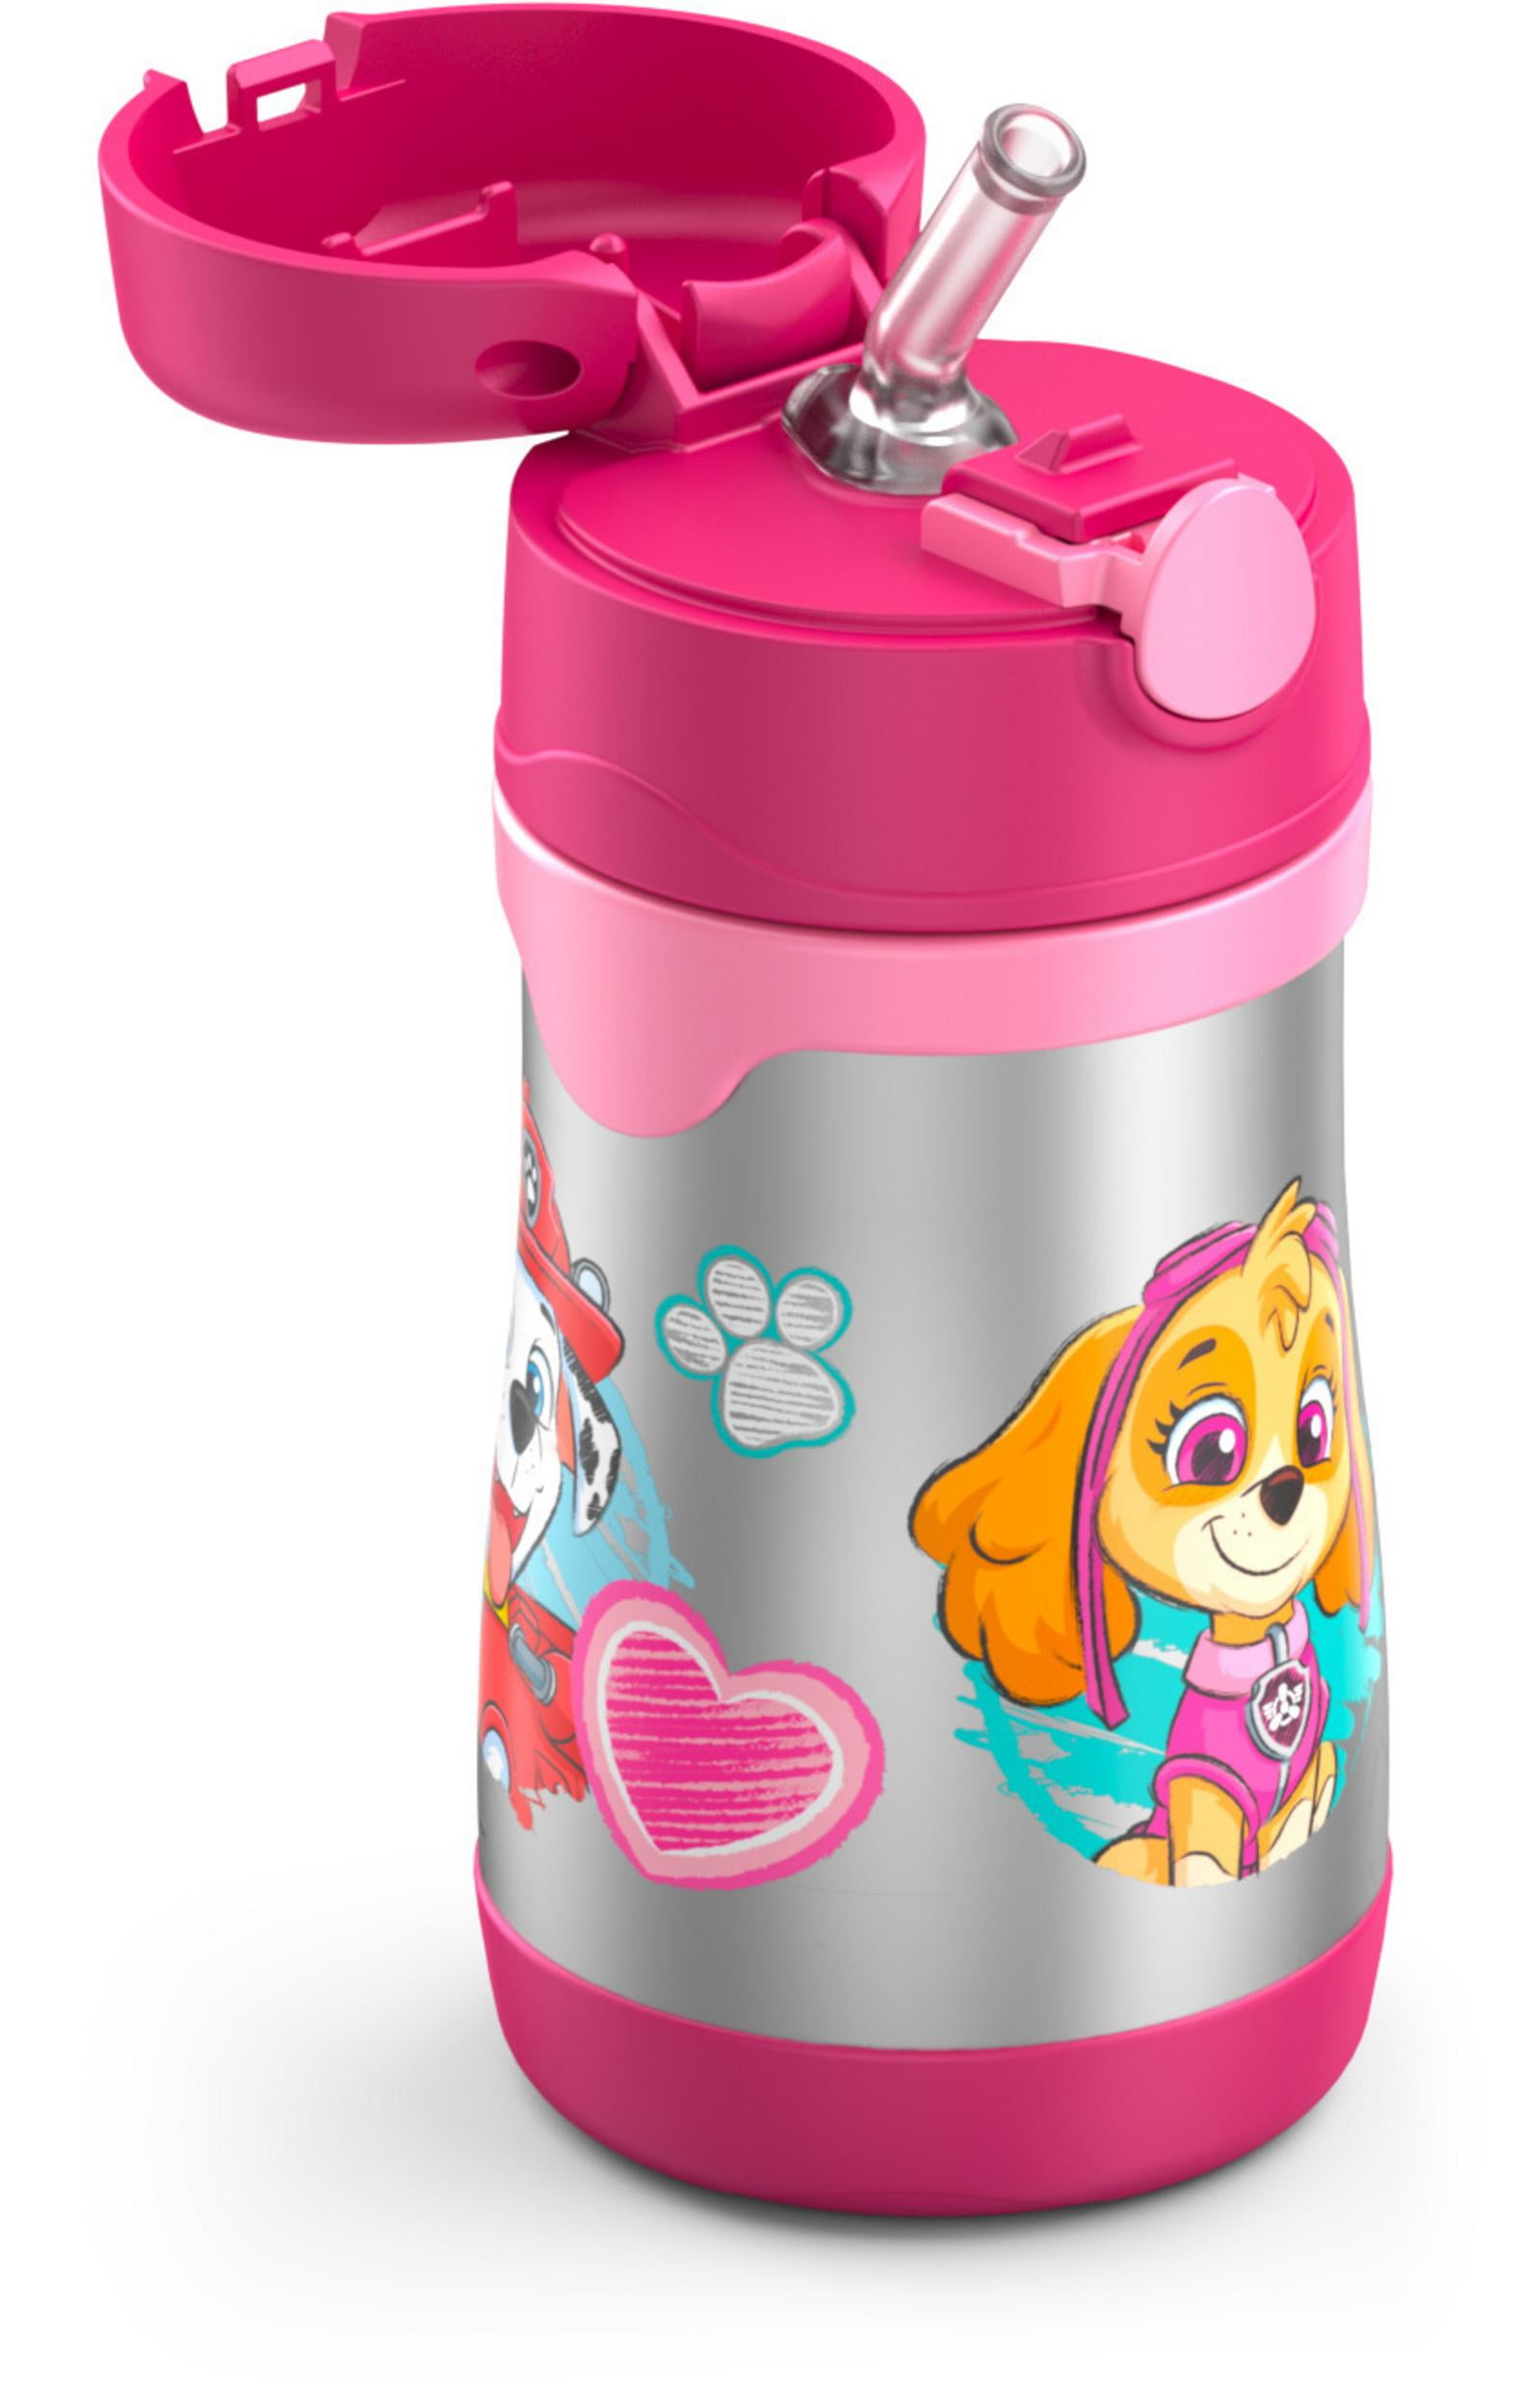  Baby thermos with straw 355 ml turquoise - Stainless steel  vacuum insulated bottle - THERMOS - 24.06 € - outdoorové oblečení a  vybavení shop